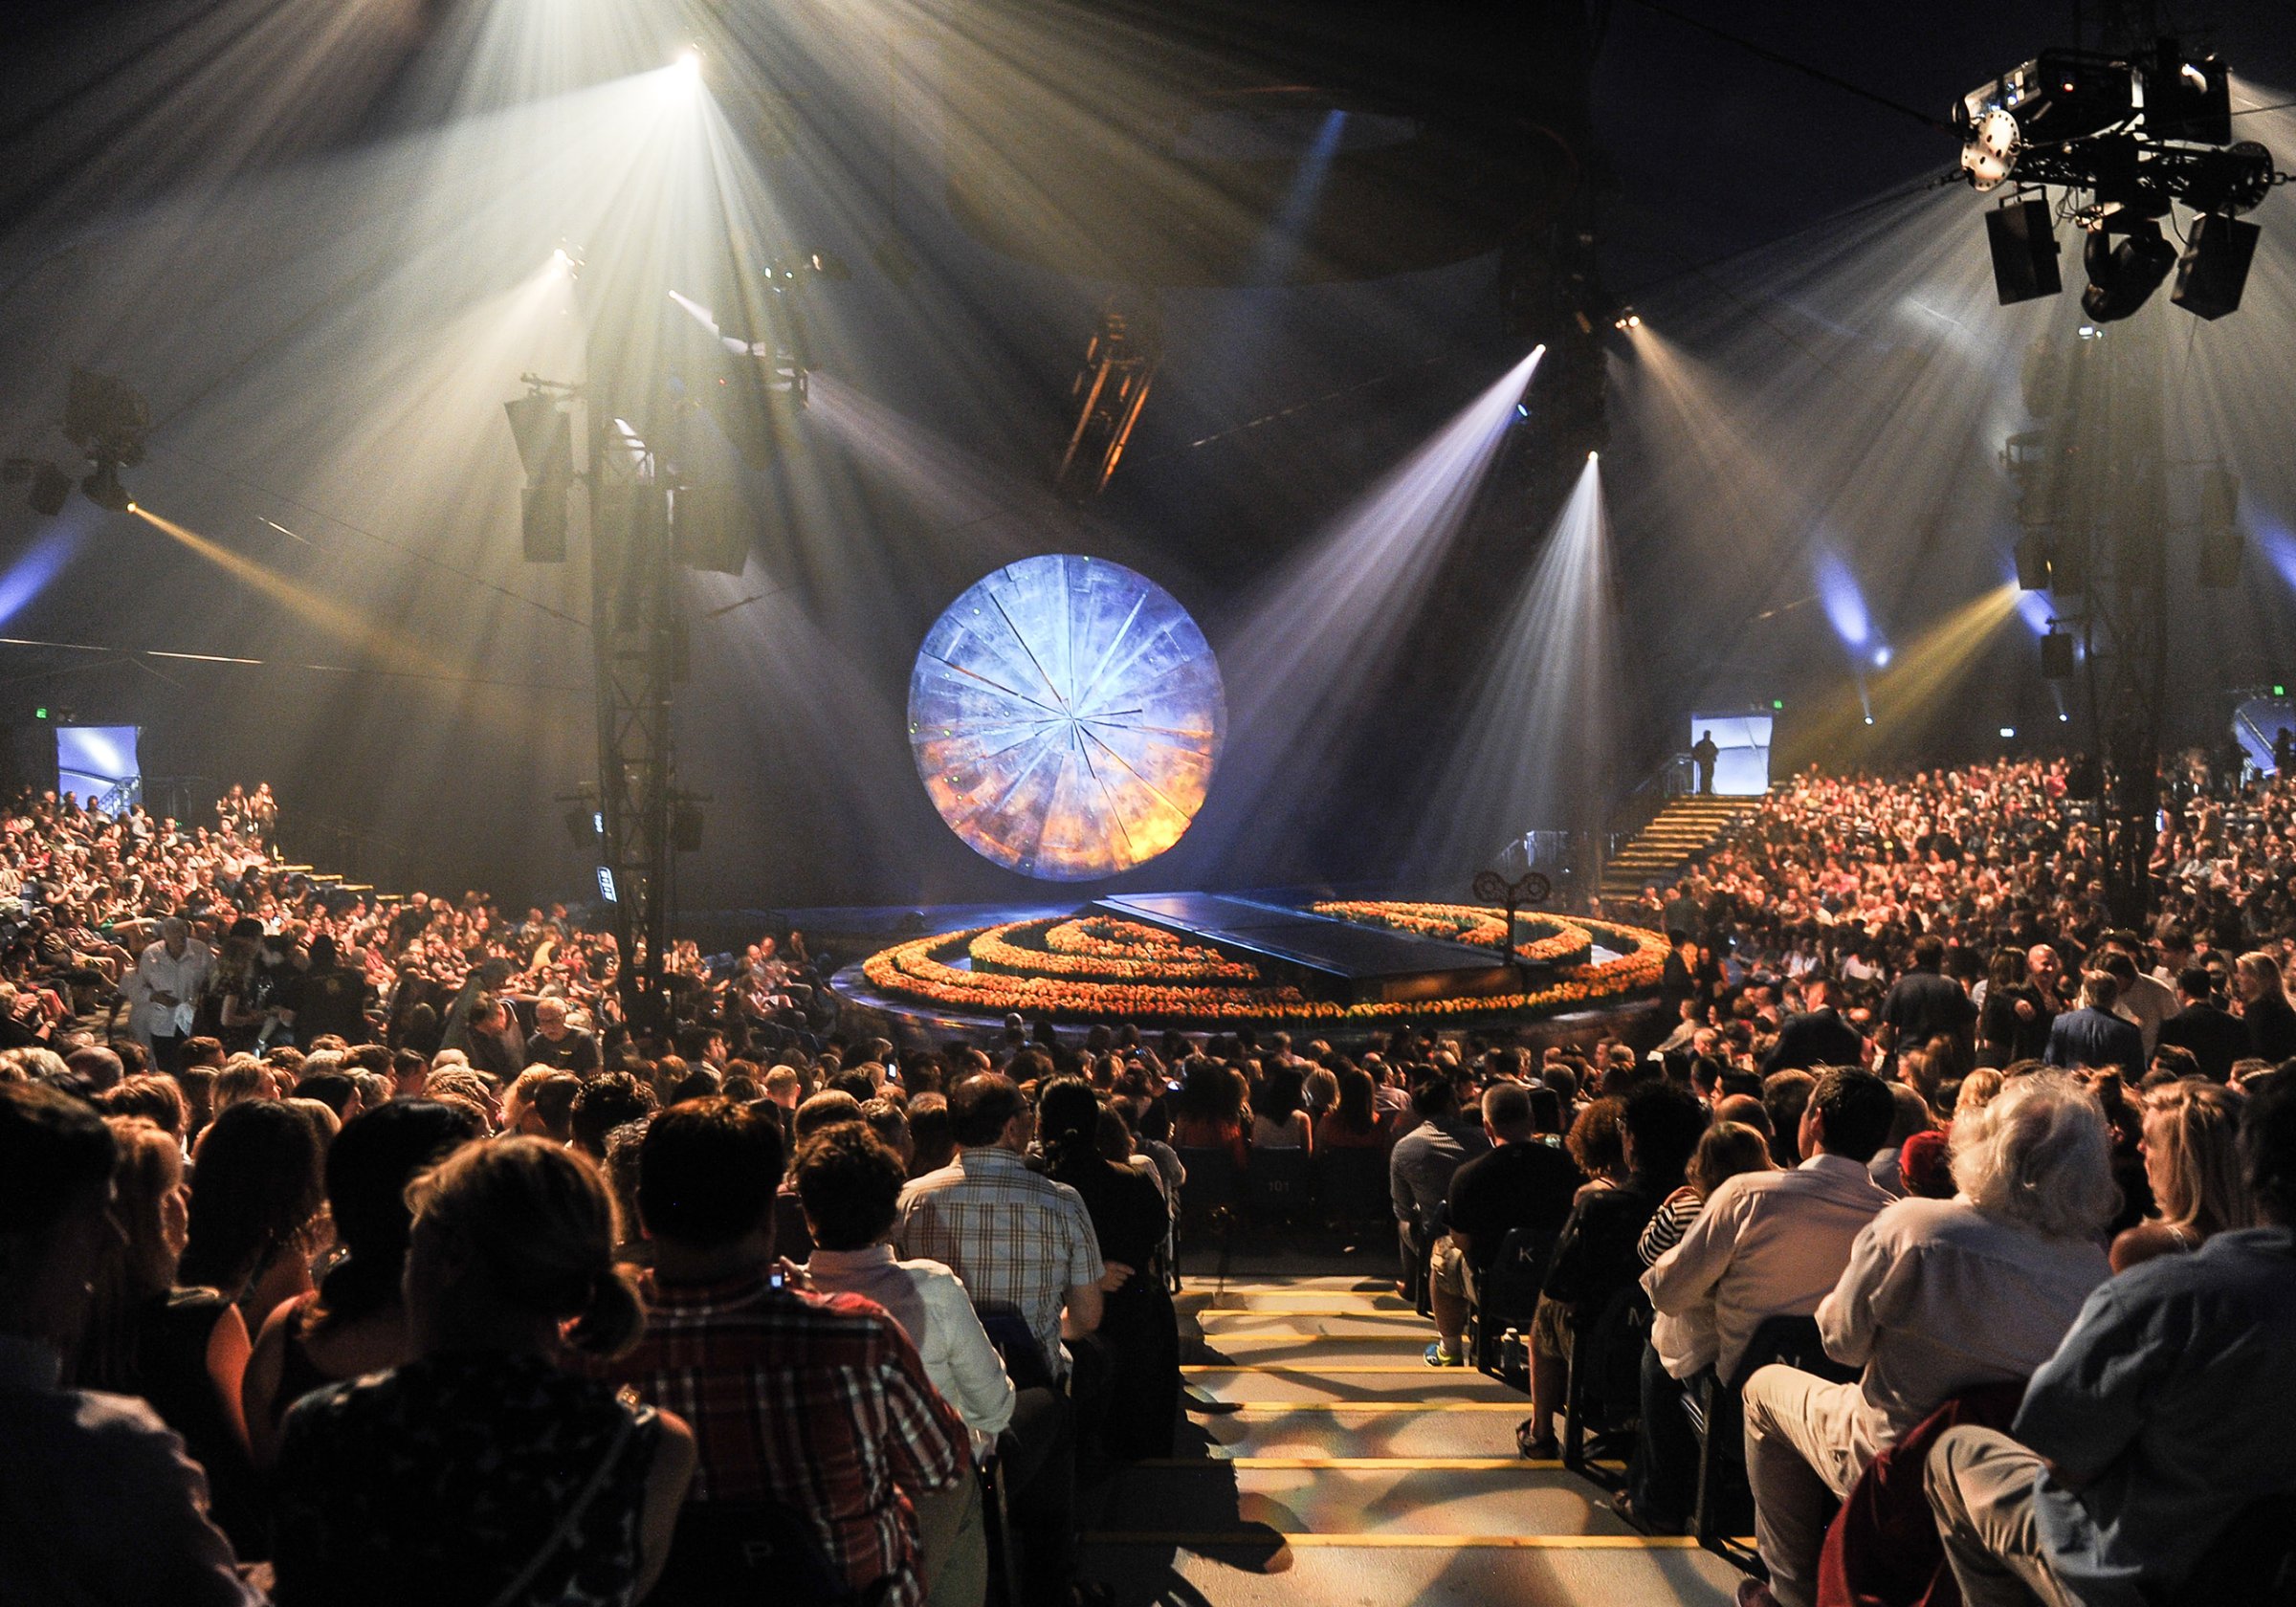 A general view of the opening of Cirque Du Soleil's "Luzia" at Port Lands on July 28, 2016 in Toronto.